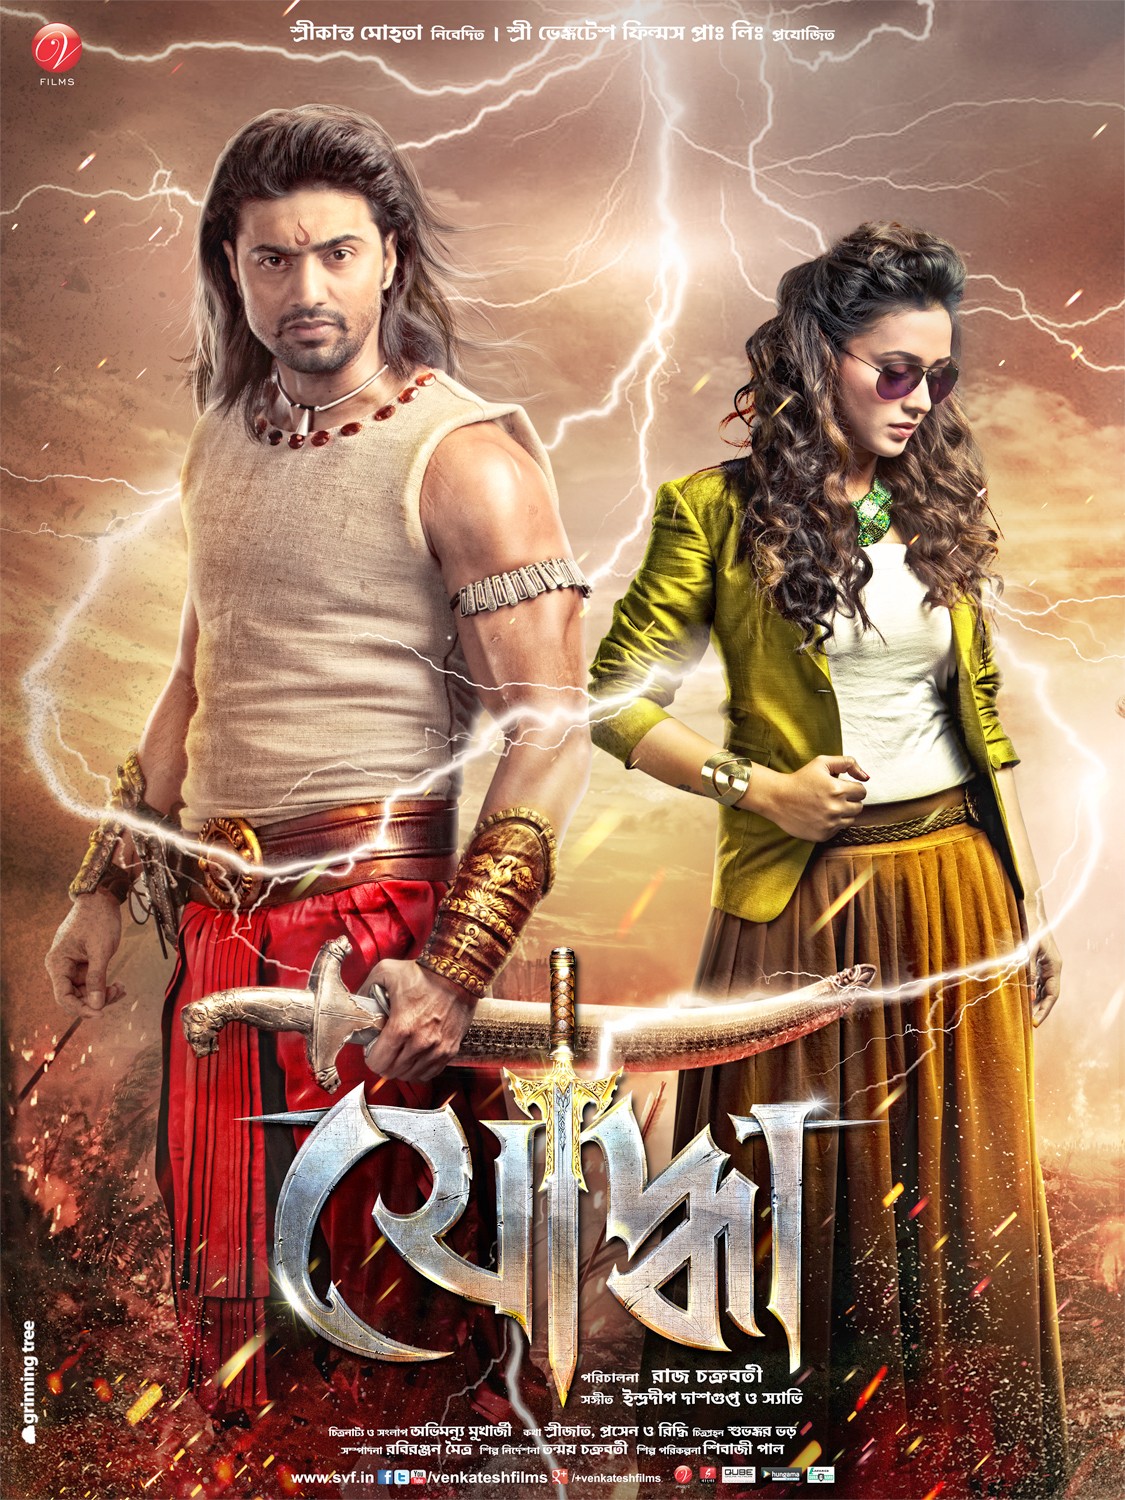 Extra Large Movie Poster Image for Yoddha The Warrior (#4 of 7)